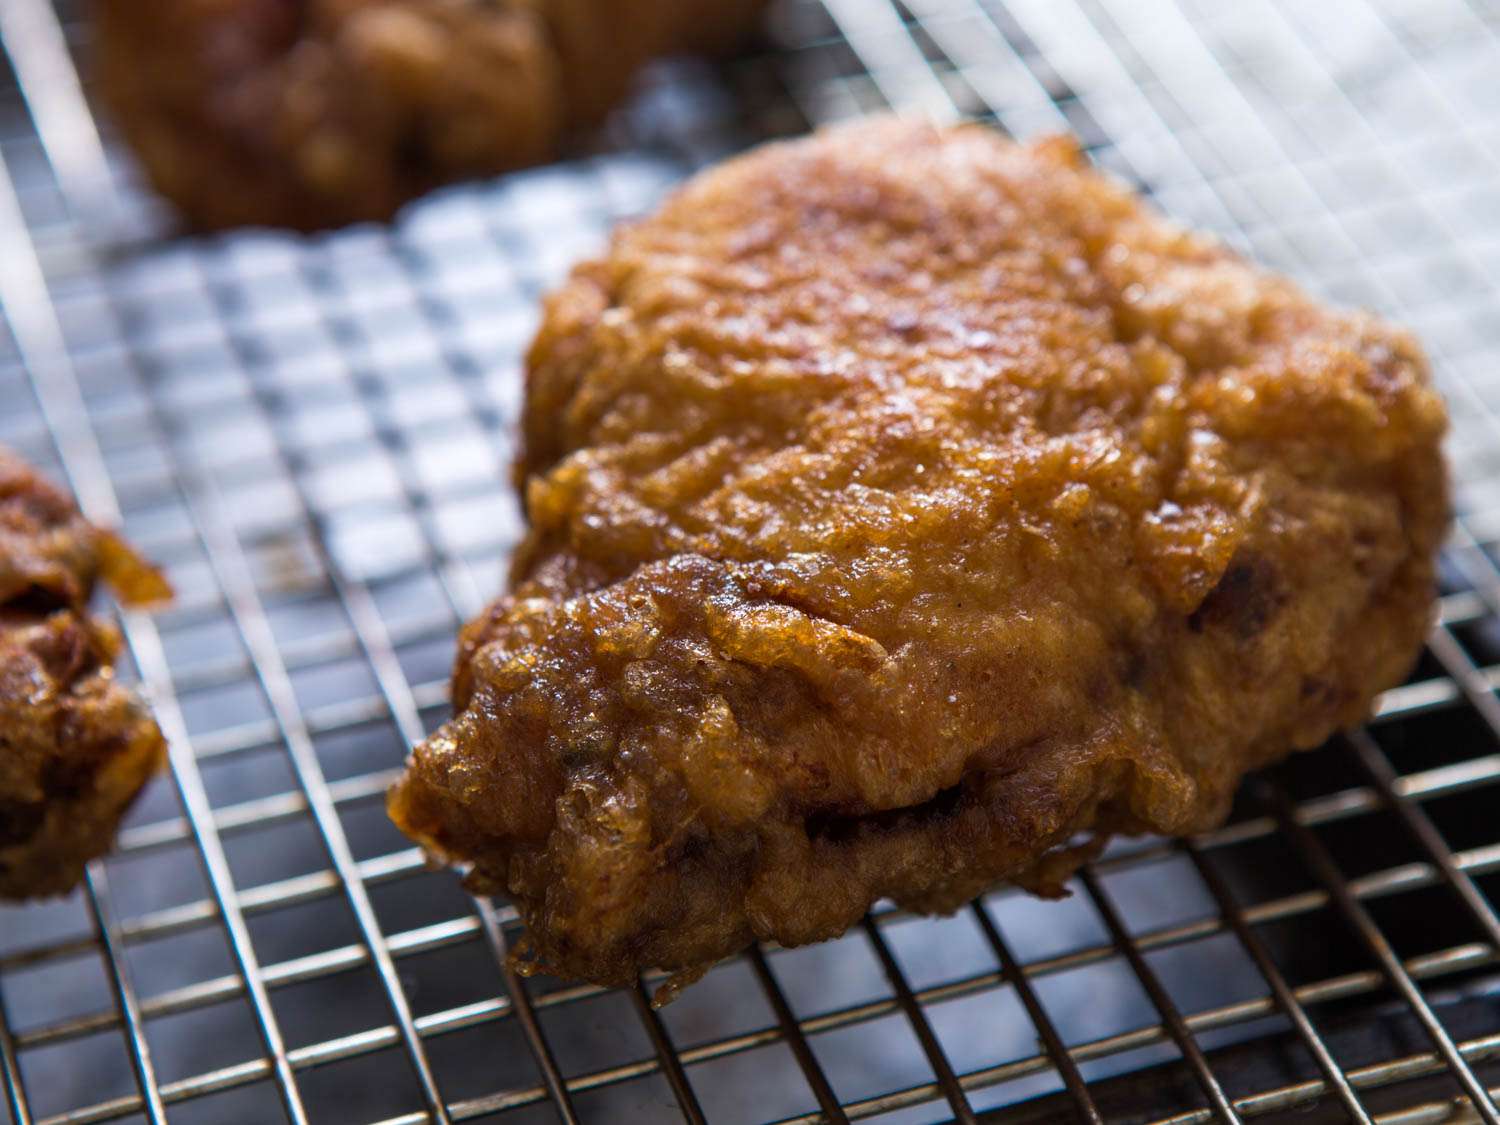 Fried chicken thigh resting on wire rack set over a baking sheet